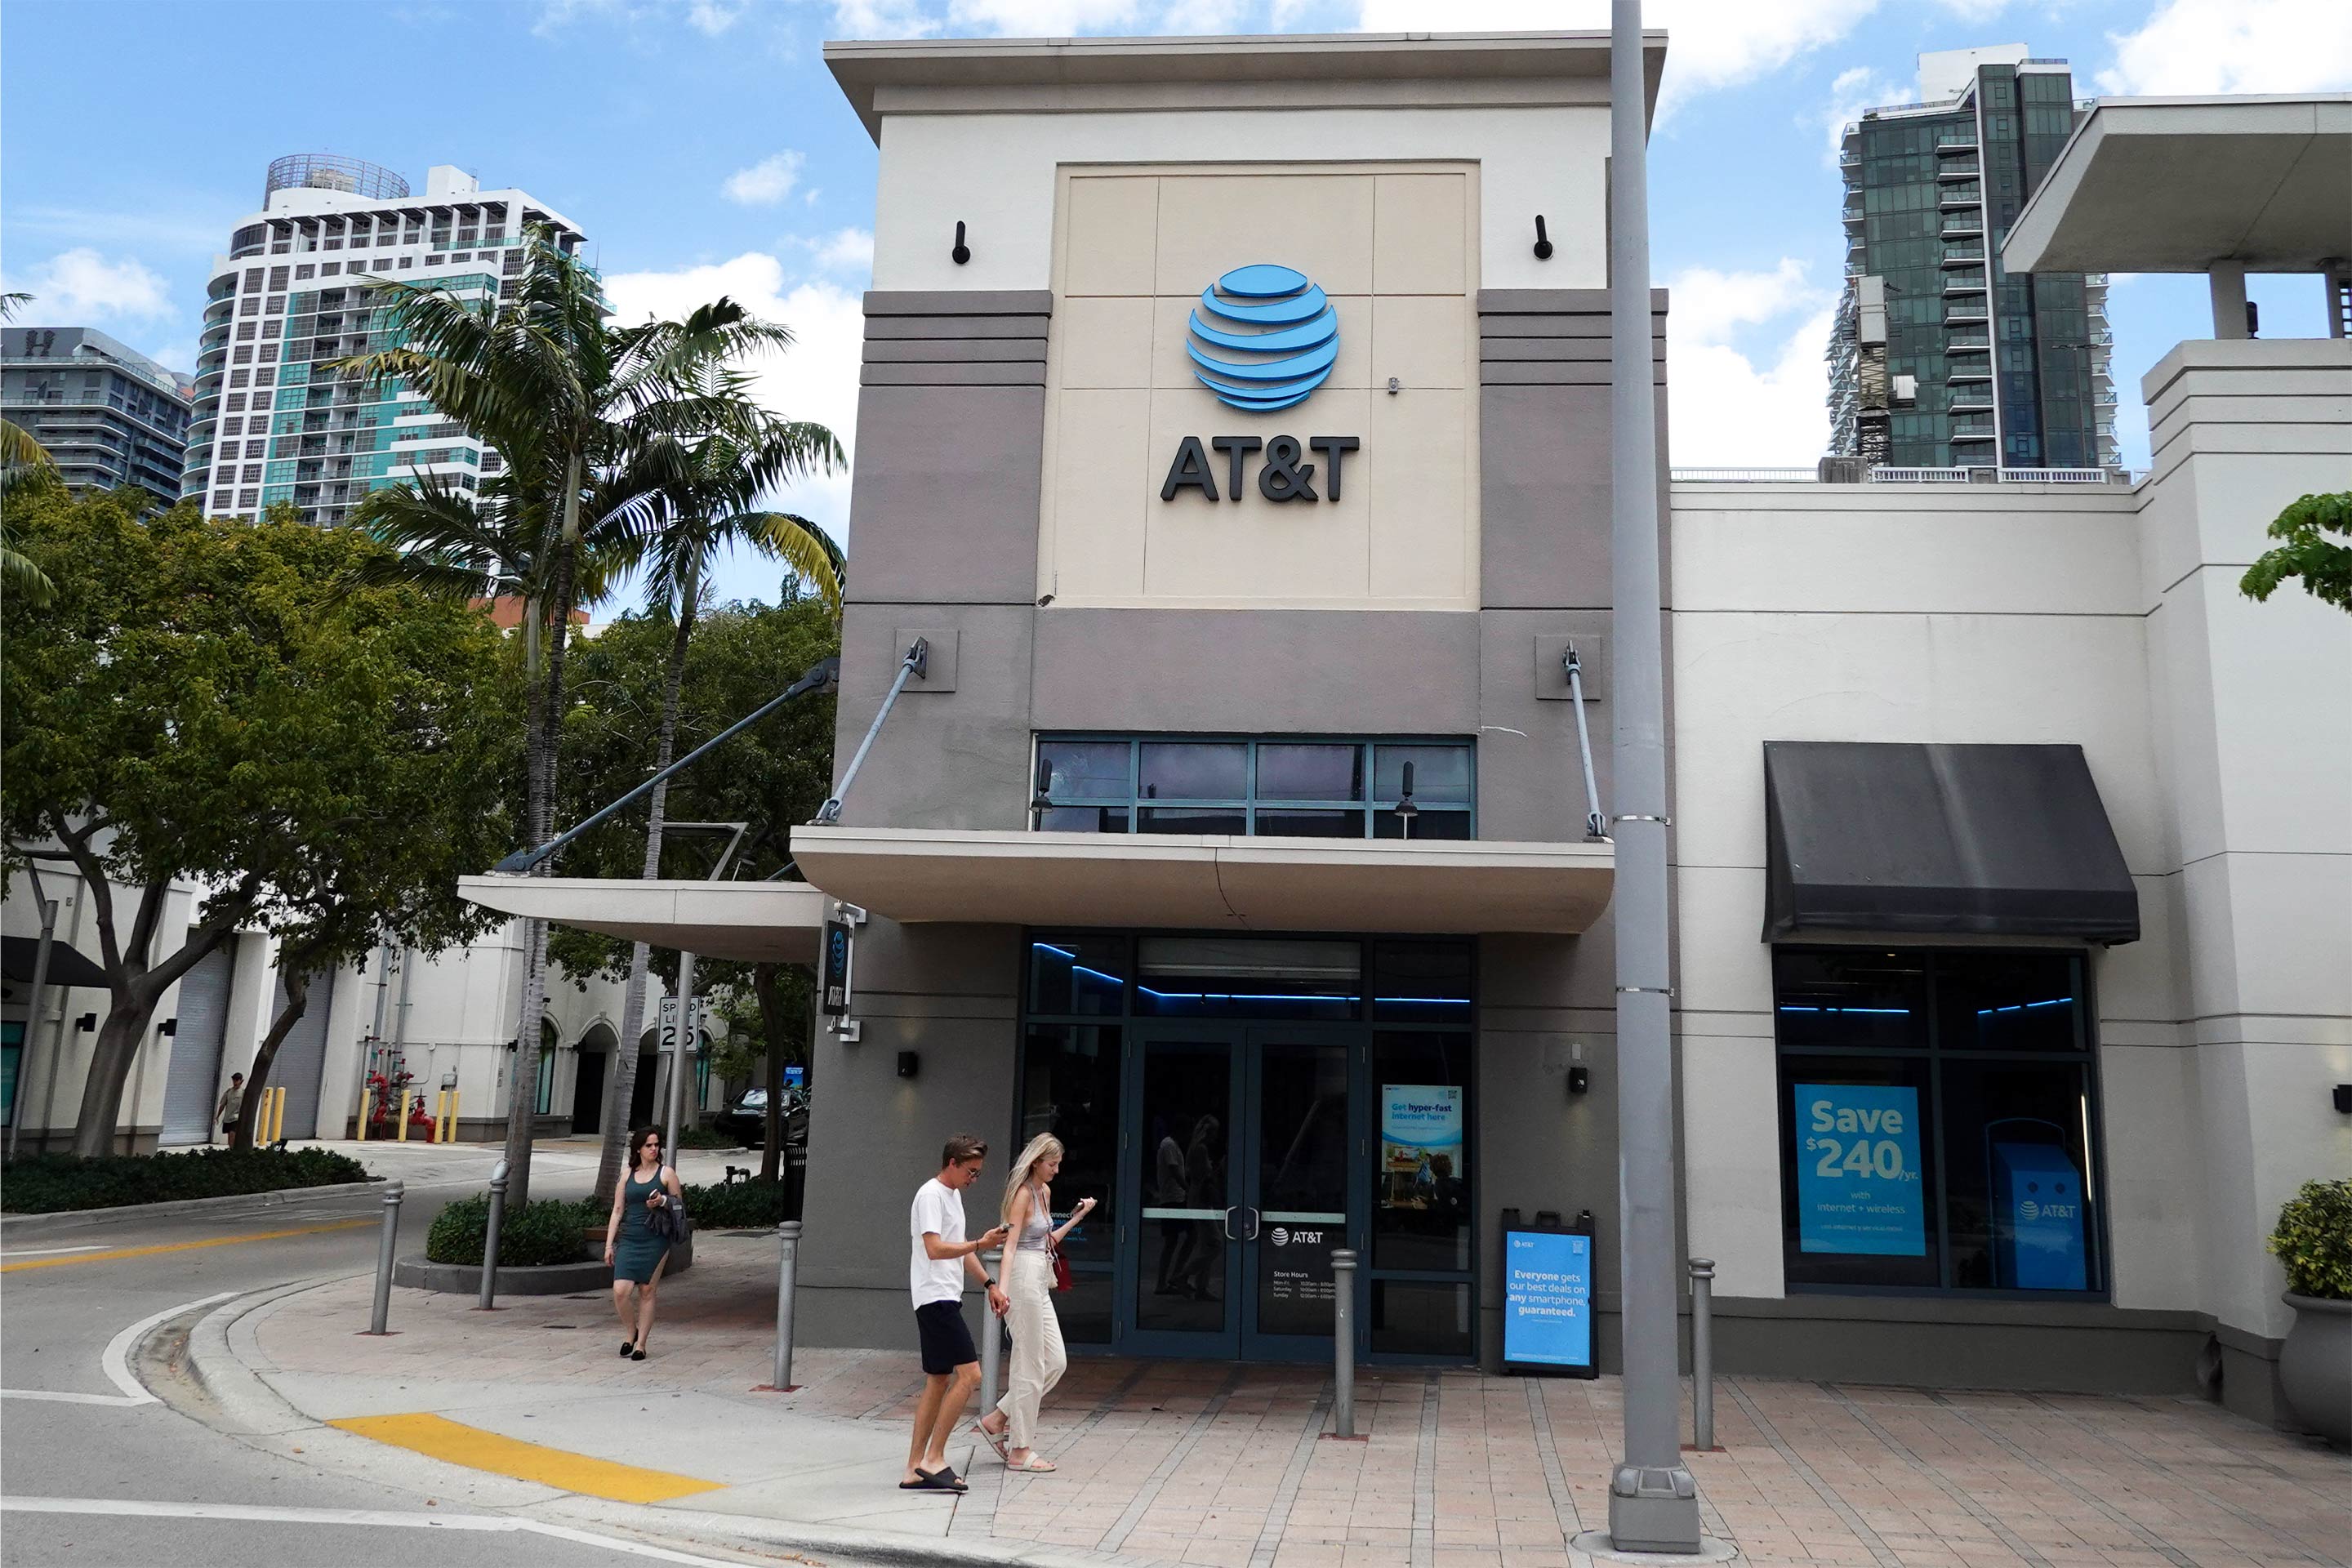 AT&T Data Breach: How to Make Sure Your Personal Information Is Safe